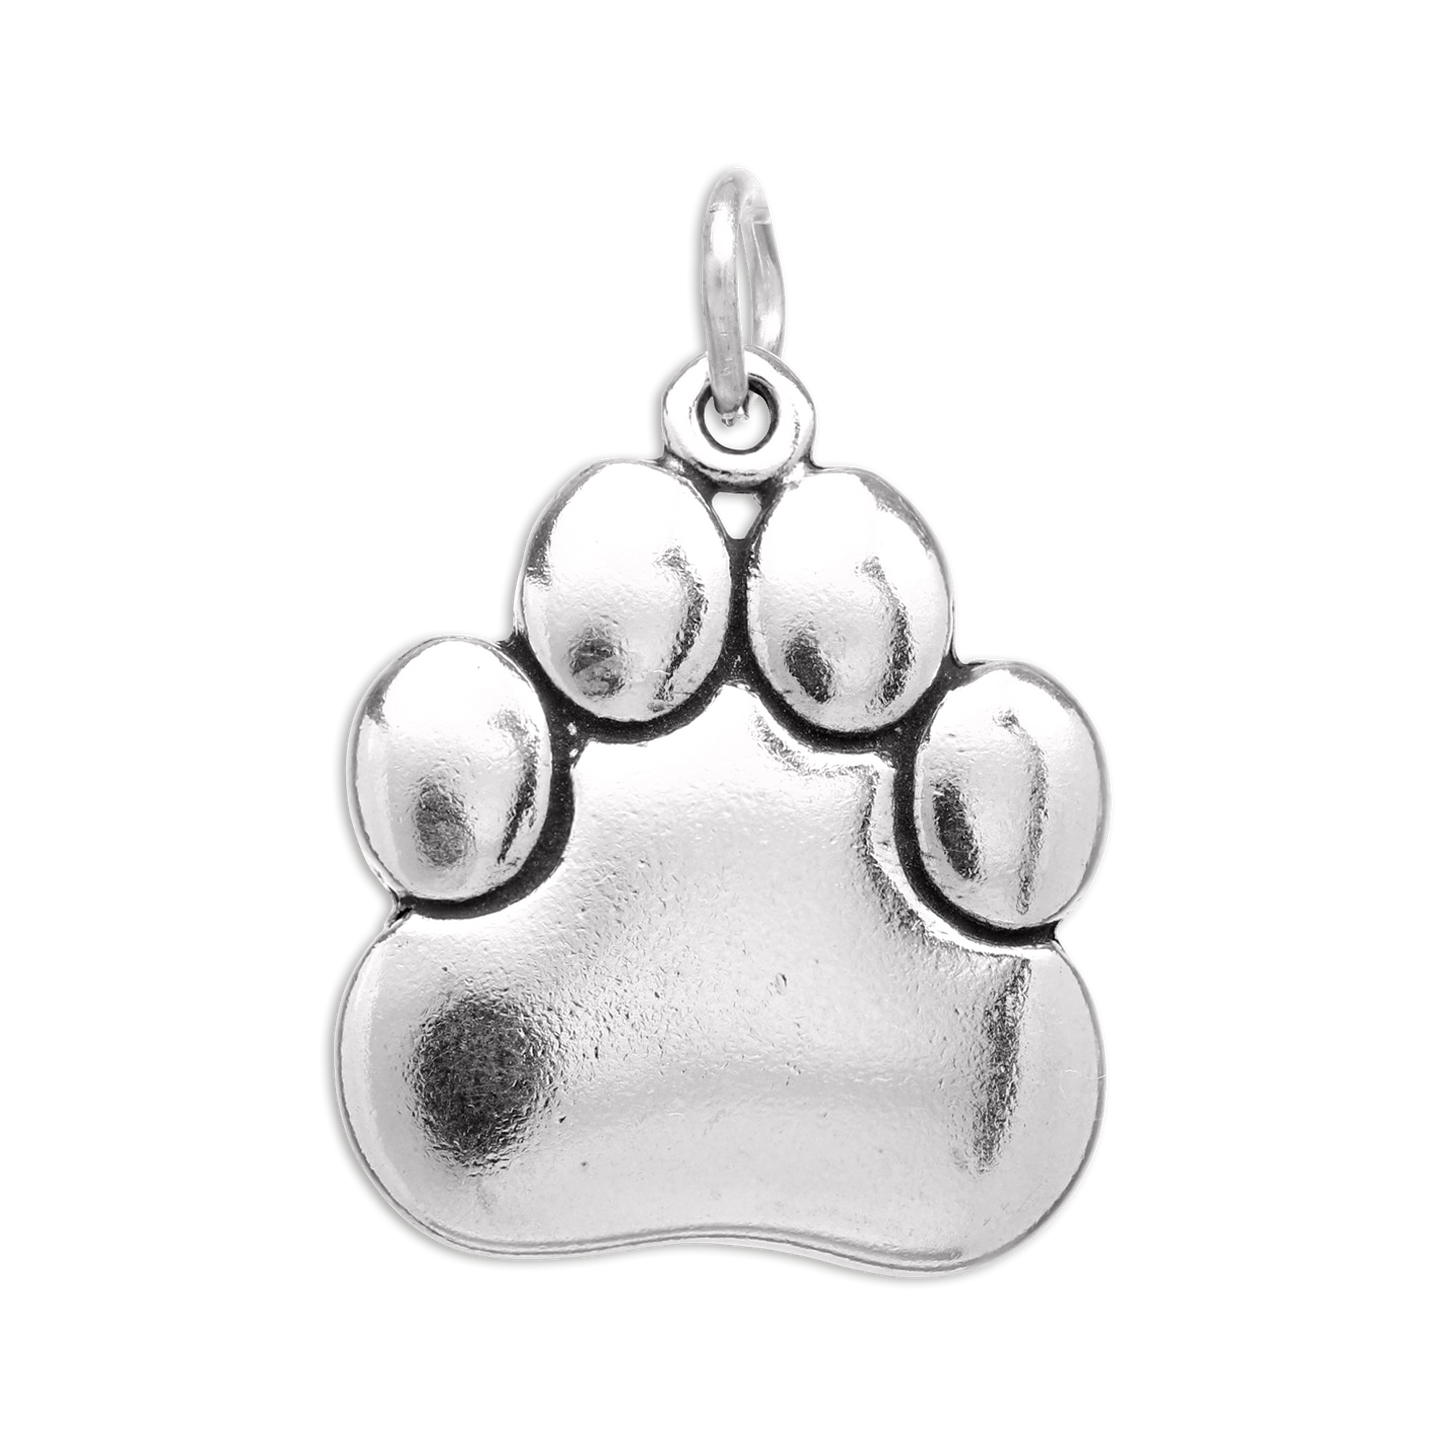 Large Sterling Silver Animal Paw Print Charm